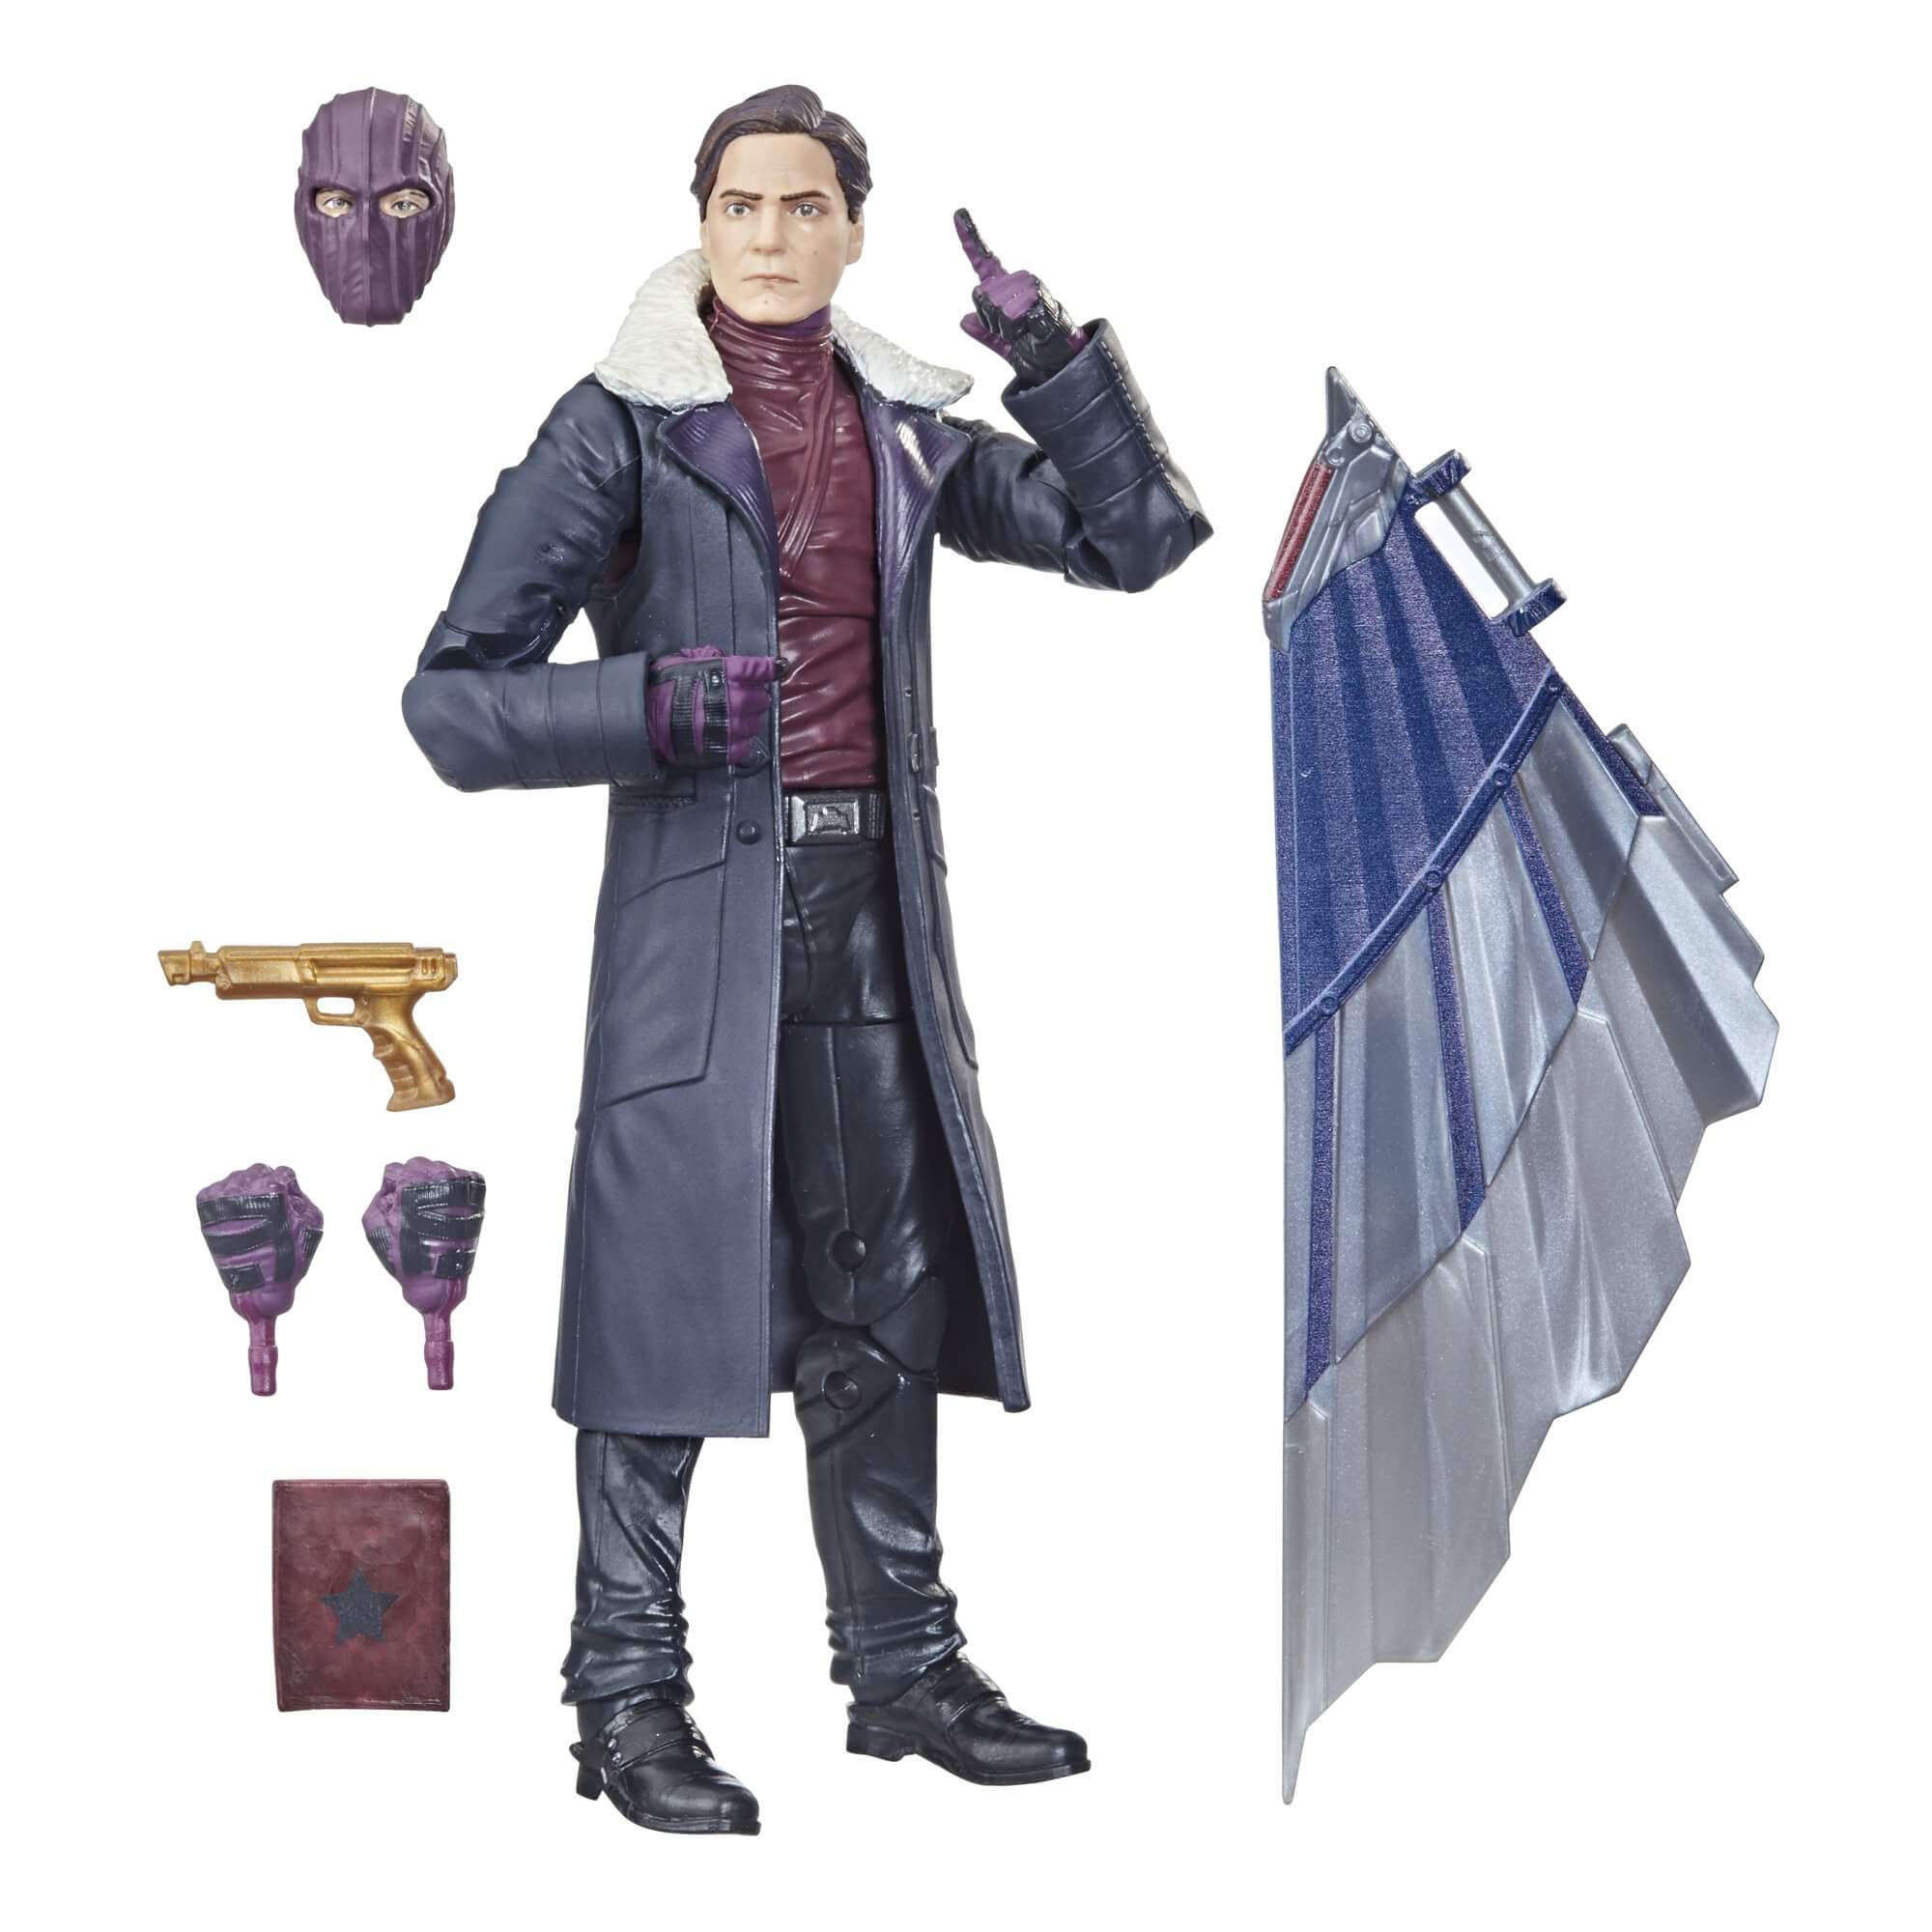 Marvel Legends Baron Zemo - BAF The Falcon And The Winter Soldier